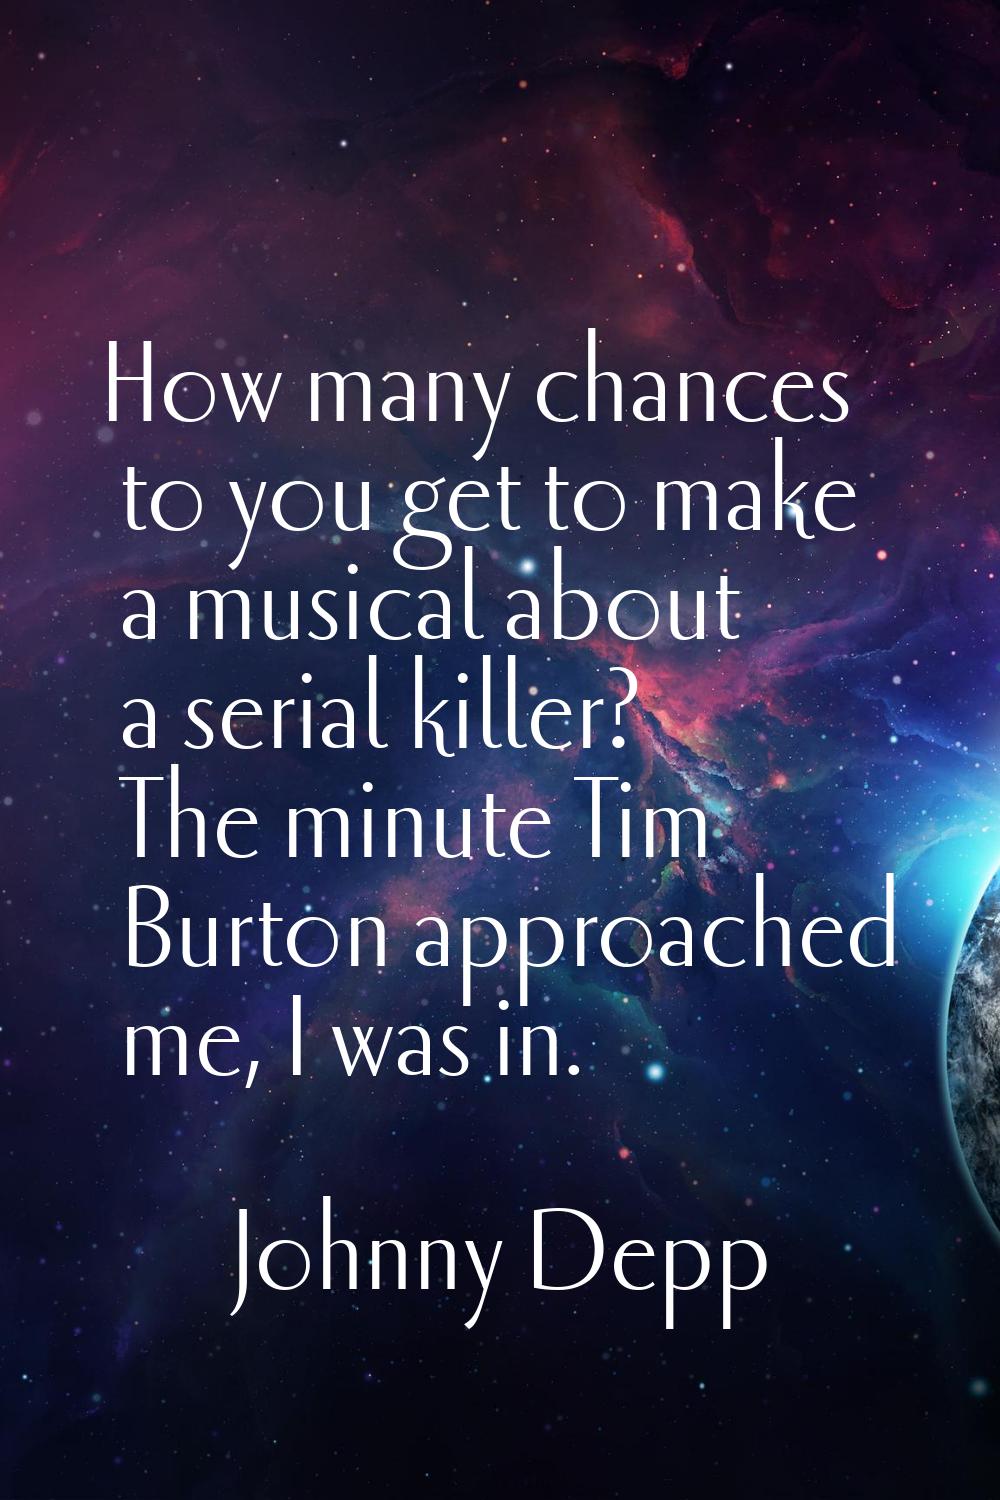 How many chances to you get to make a musical about a serial killer? The minute Tim Burton approach